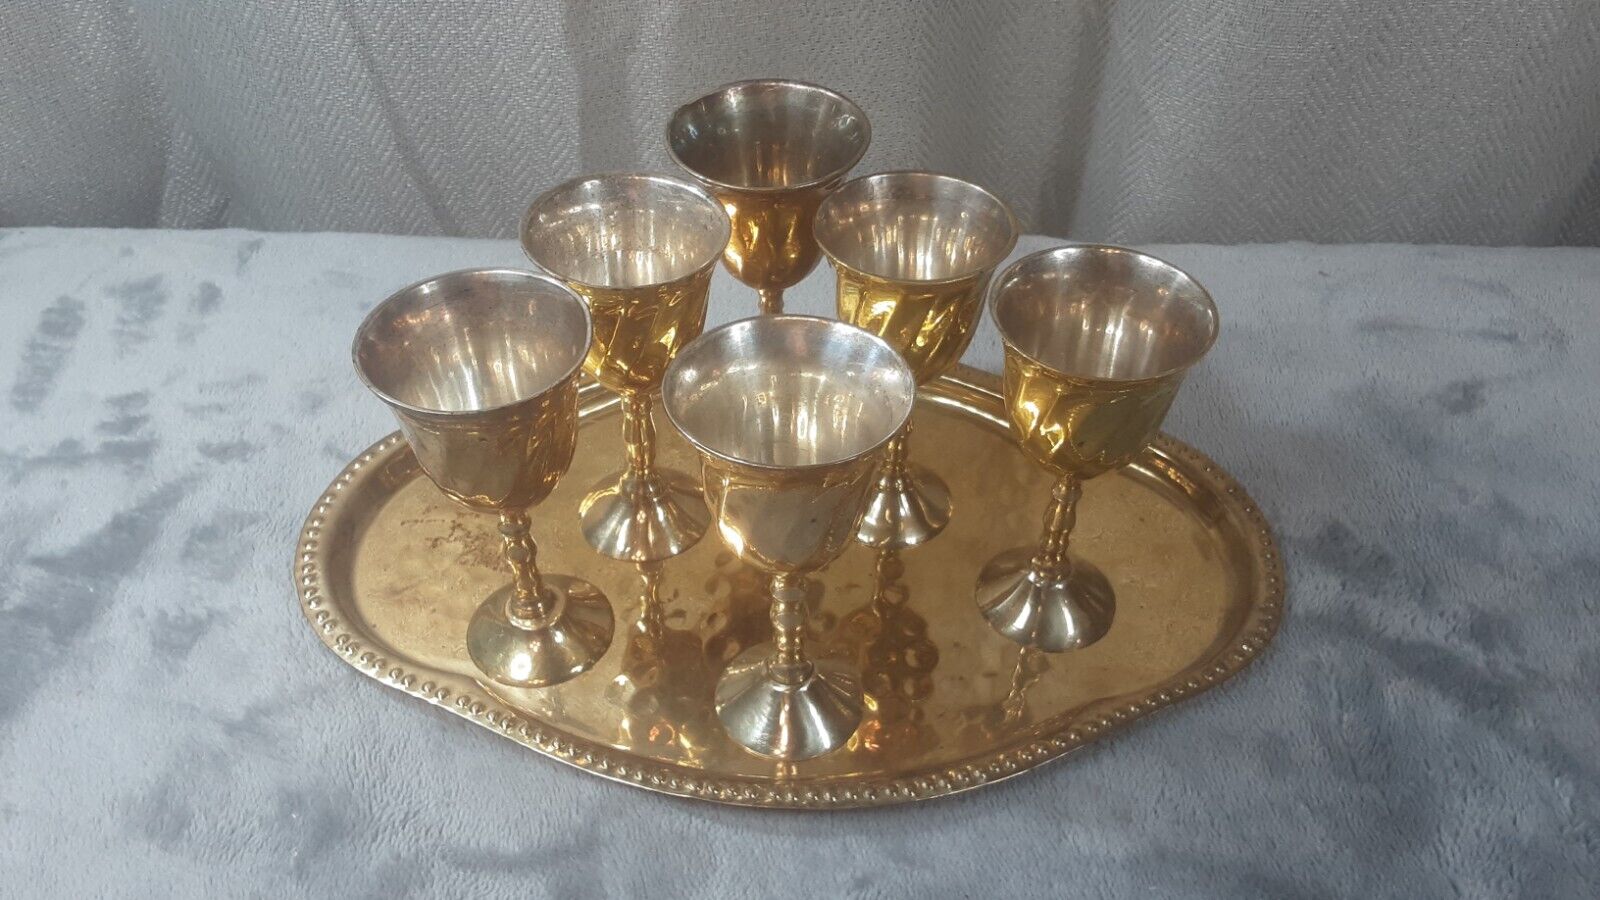 Vintage Silver Lined Brass Mini Chalice Goblet Set of 6 w Hammered Brass Tray